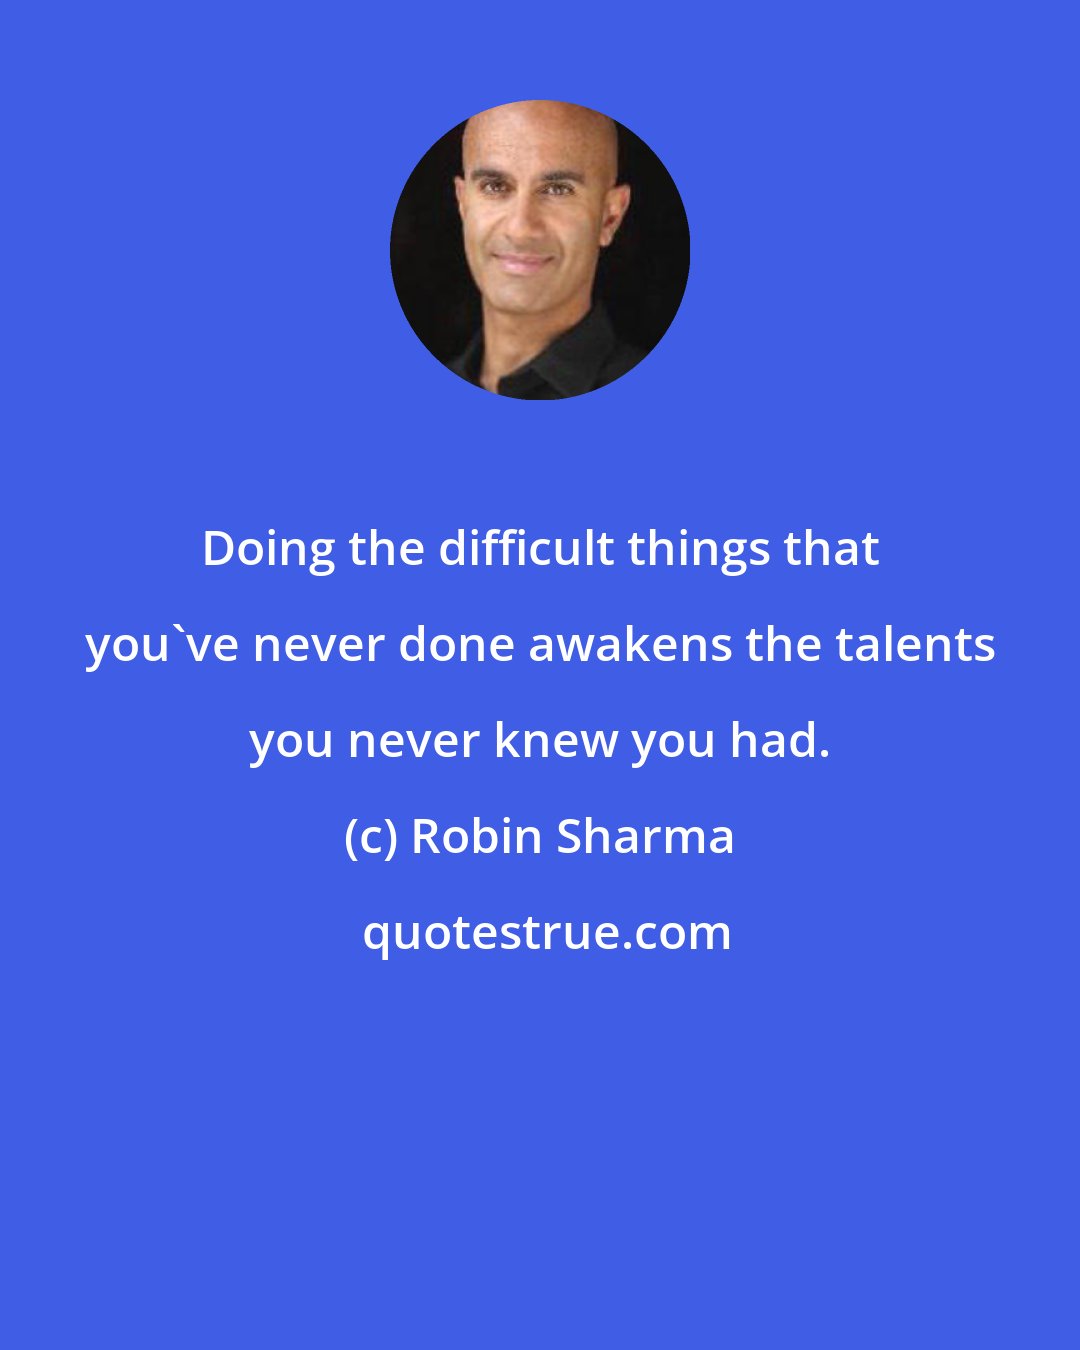 Robin Sharma: Doing the difficult things that you've never done awakens the talents you never knew you had.